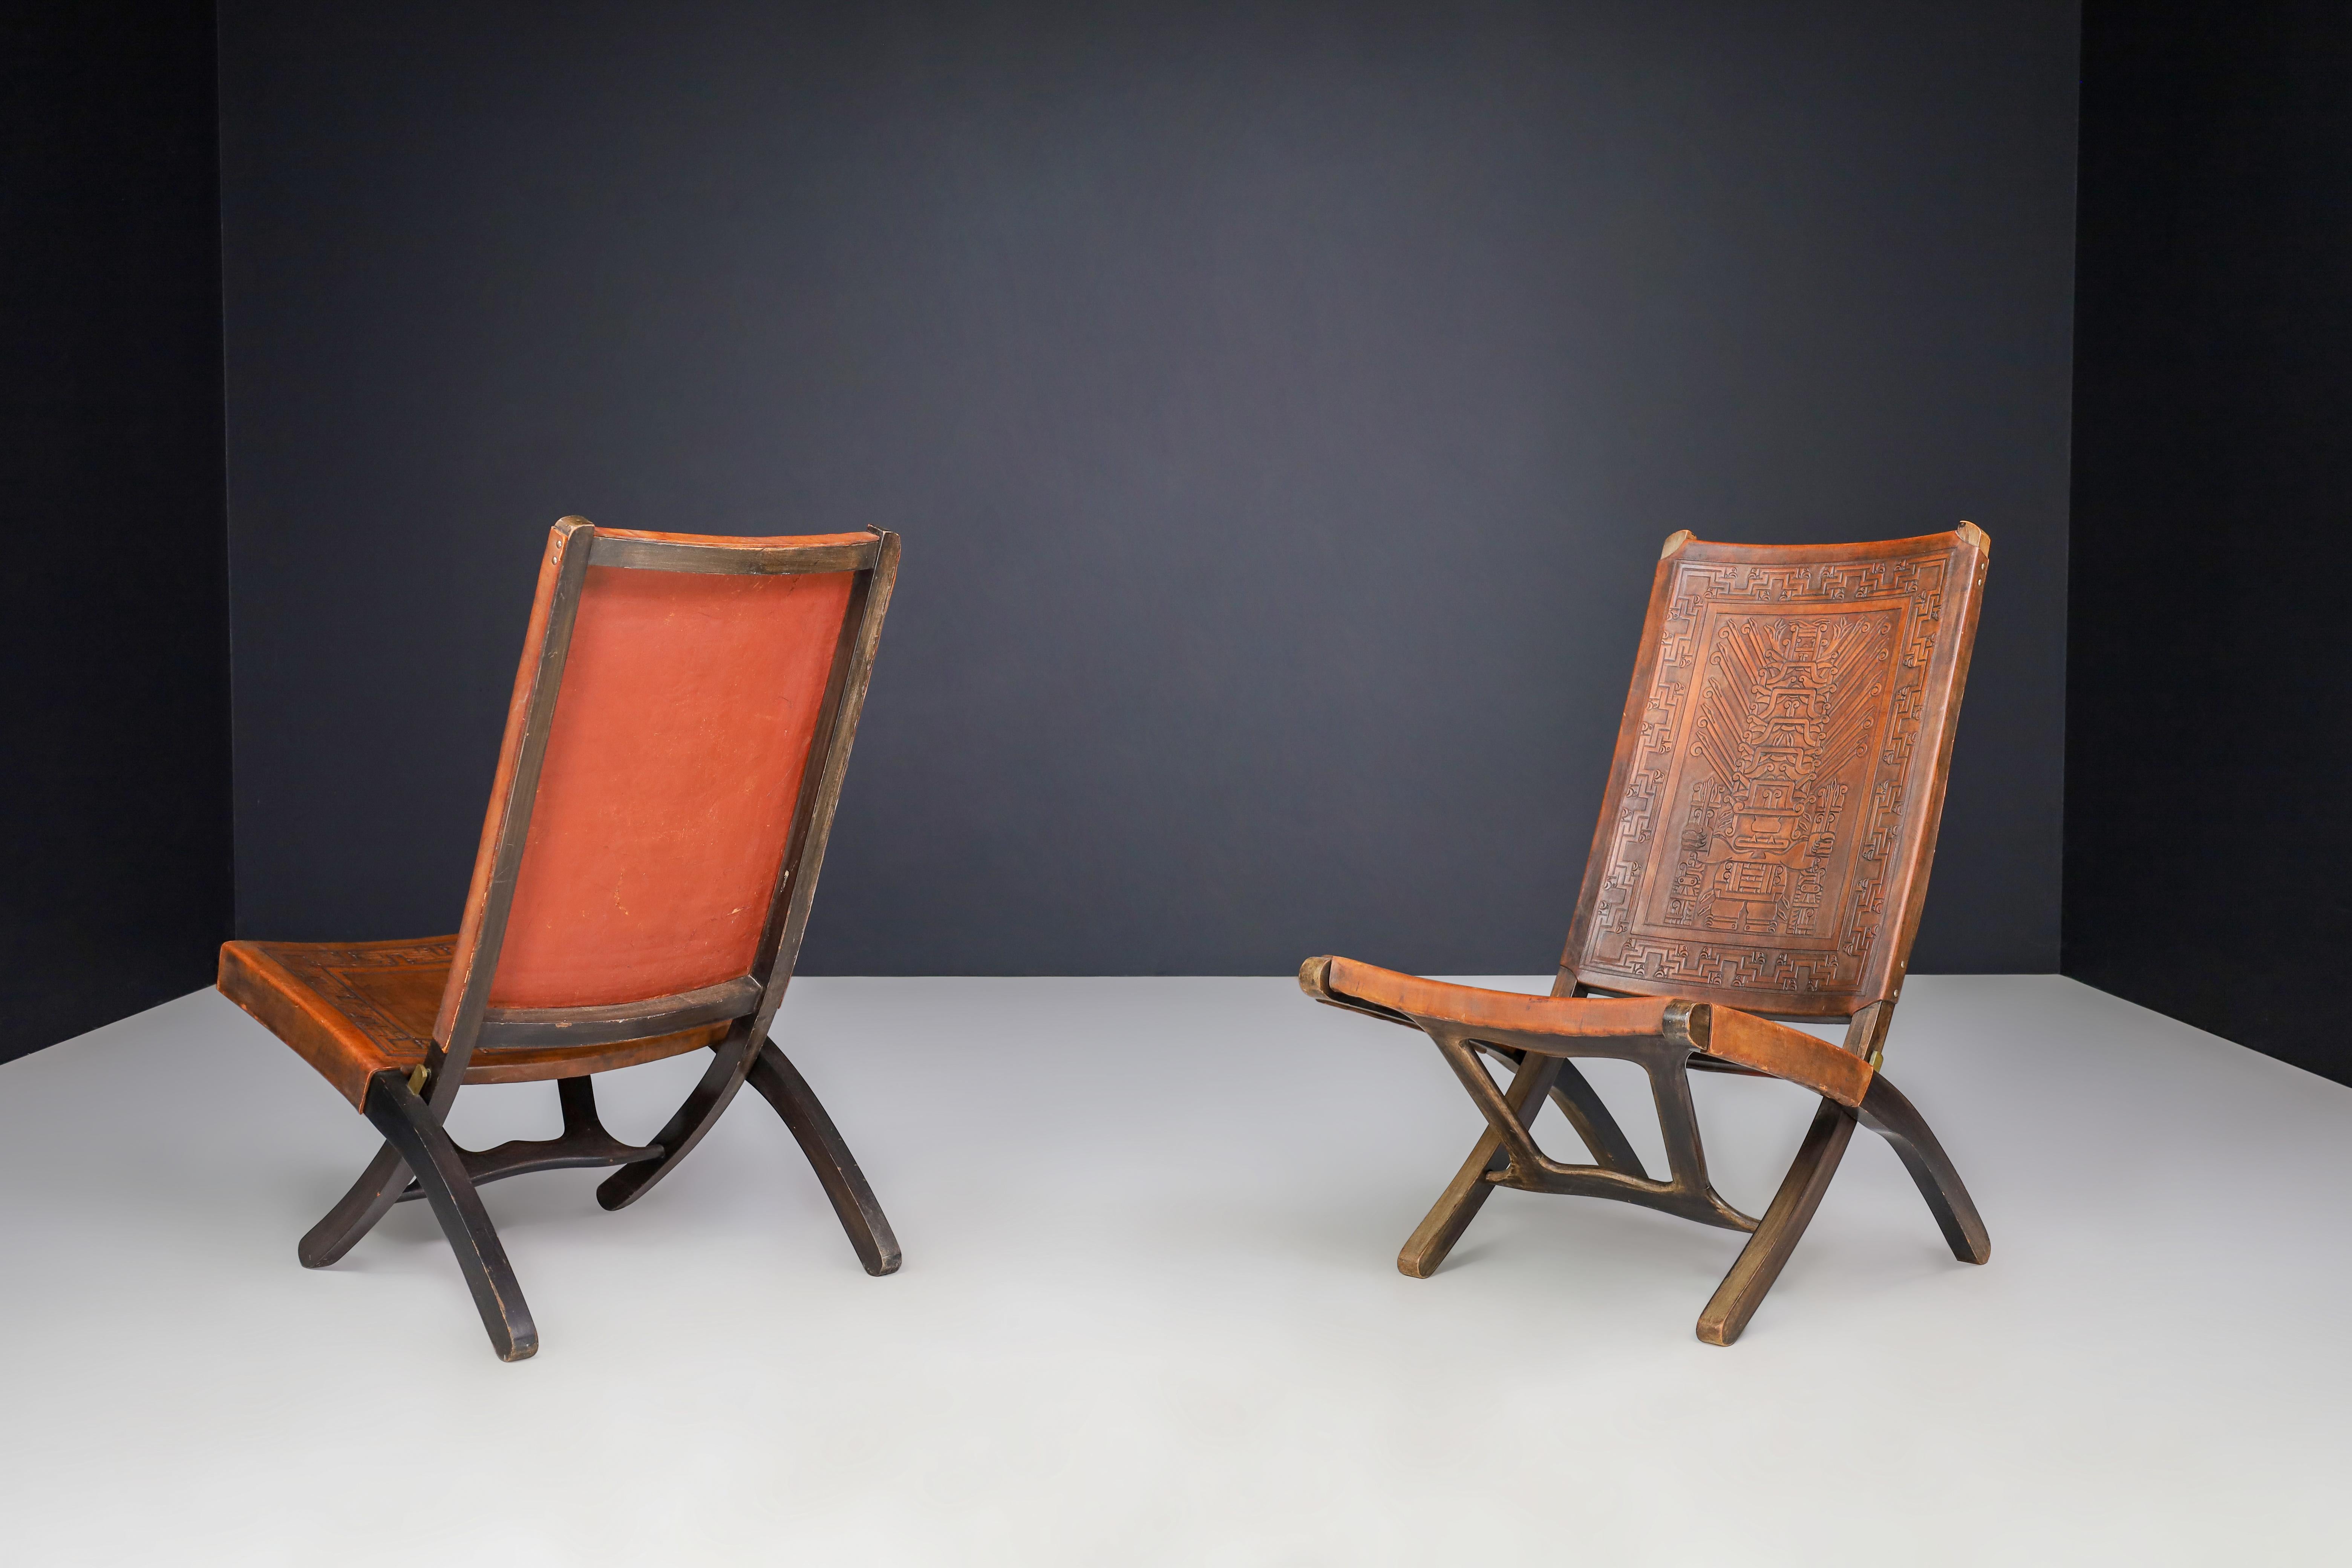 Angel I. Pazmino Cognac-colored Saddle Leather Folding Chairs Ecuador 1970s   For Sale 2